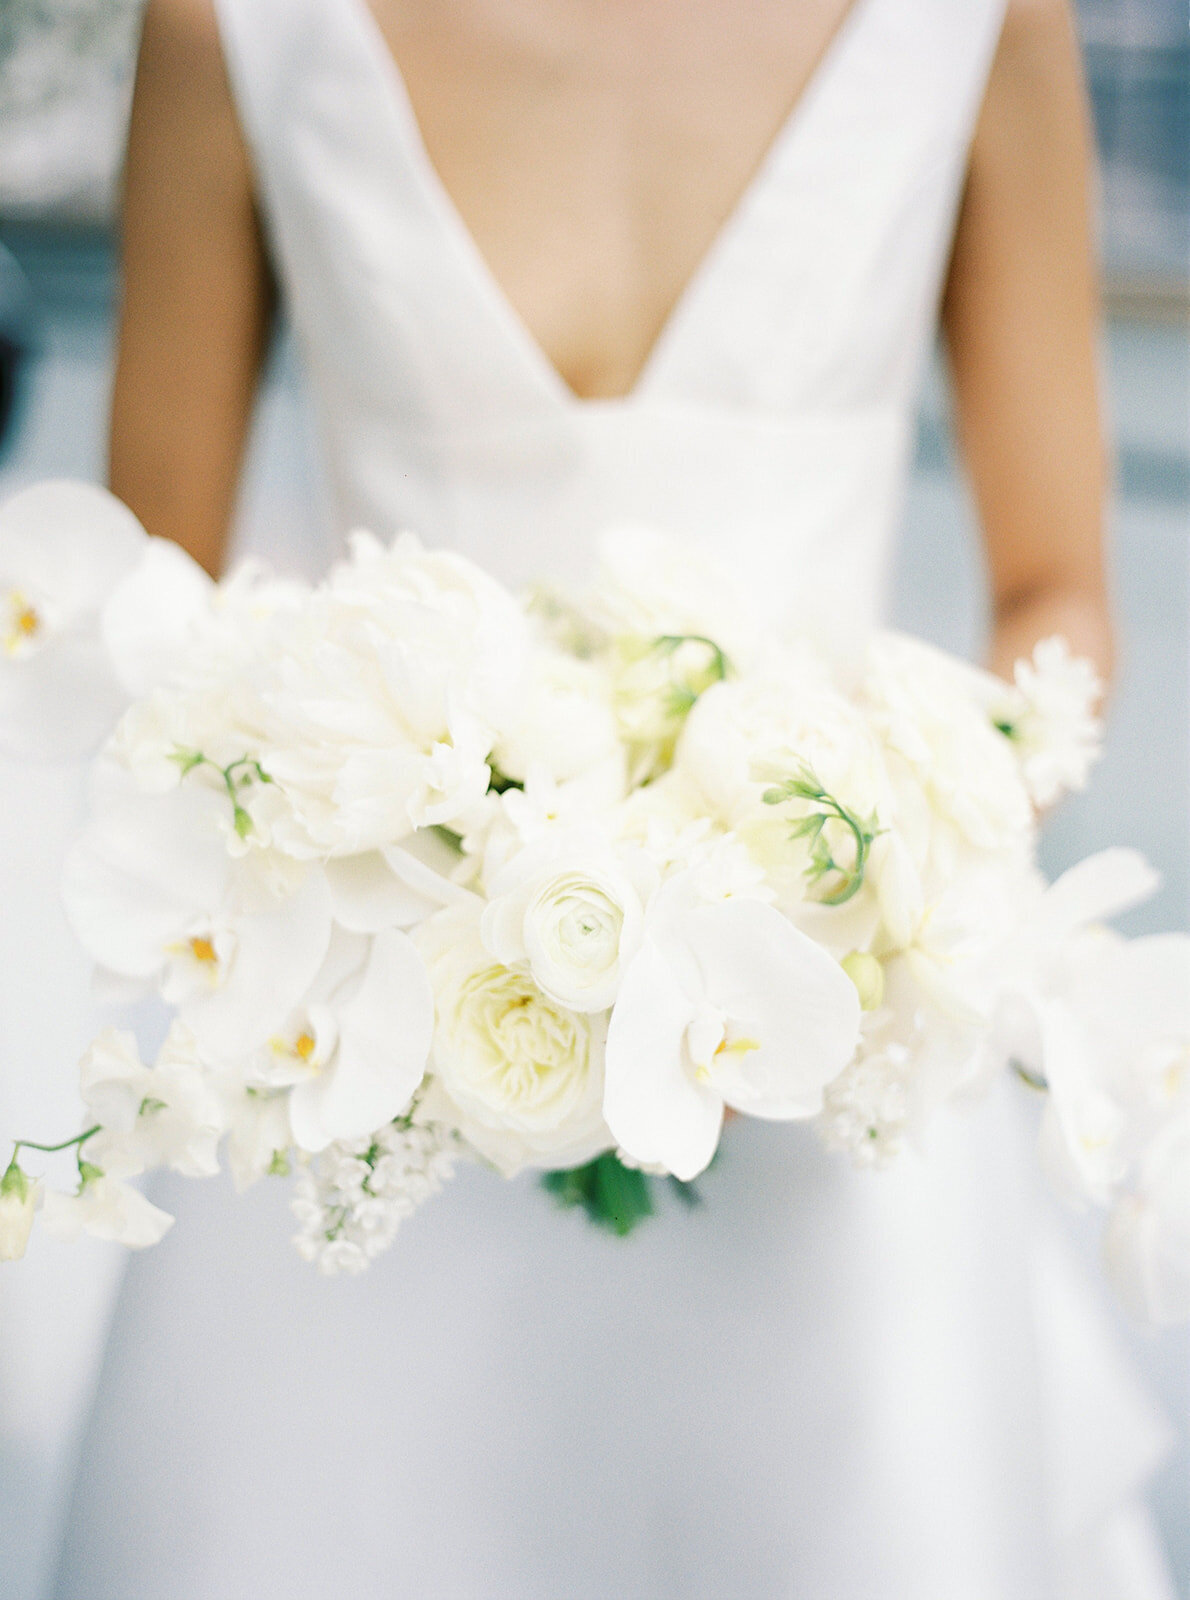 Romantic wedding bouquet with white spring flowers